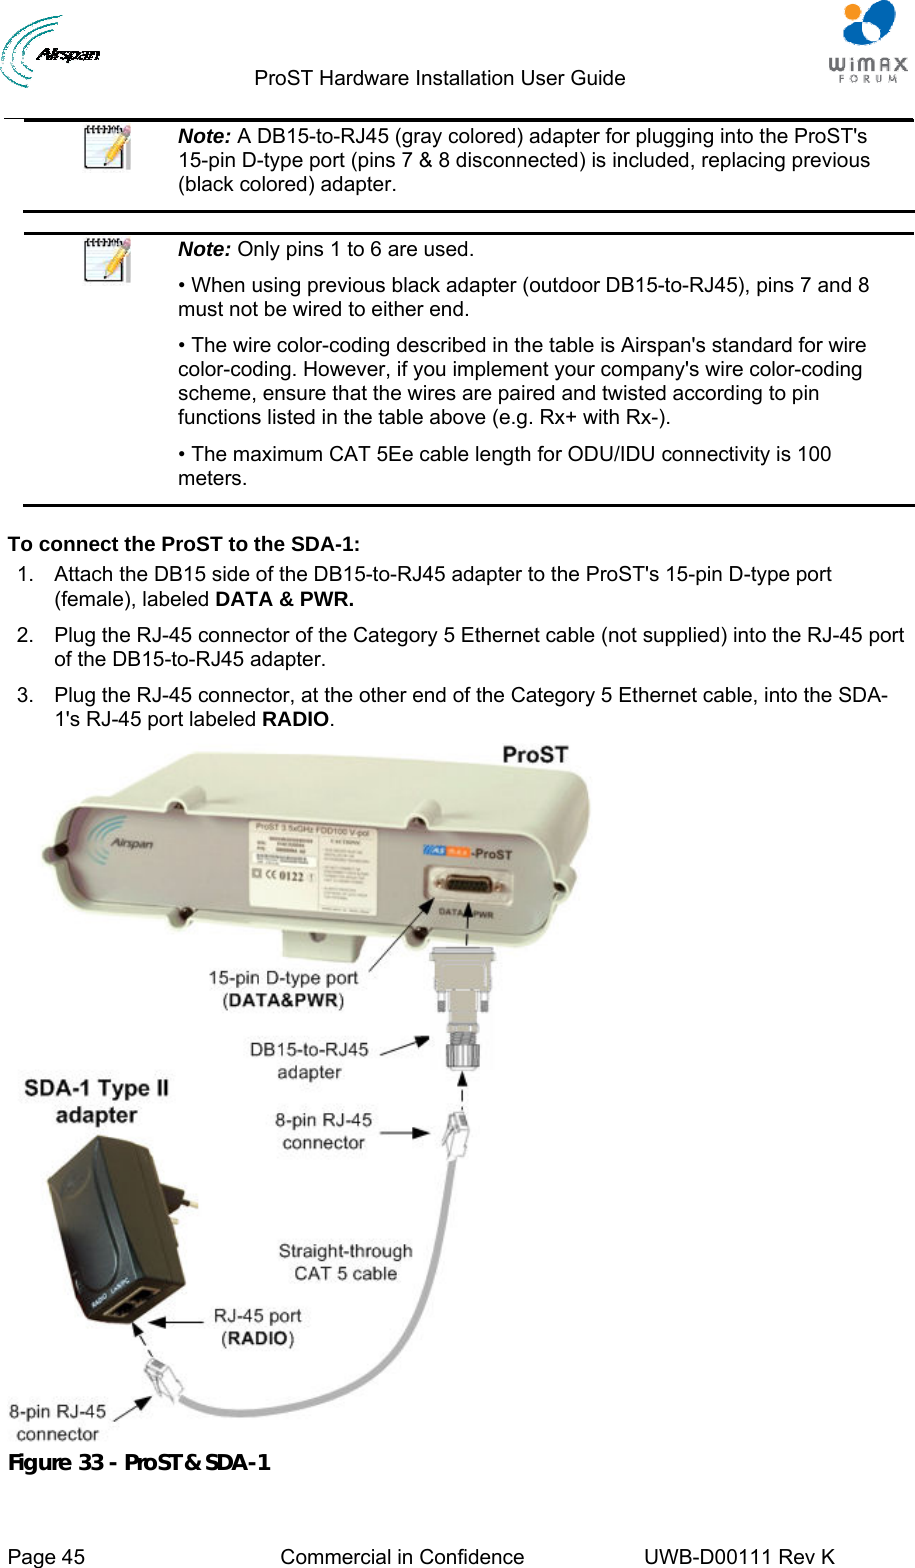                                  ProST Hardware Installation User Guide     Page 45  Commercial in Confidence  UWB-D00111 Rev K    Note: A DB15-to-RJ45 (gray colored) adapter for plugging into the ProST&apos;s 15-pin D-type port (pins 7 &amp; 8 disconnected) is included, replacing previous (black colored) adapter.   Note: Only pins 1 to 6 are used. • When using previous black adapter (outdoor DB15-to-RJ45), pins 7 and 8 must not be wired to either end. • The wire color-coding described in the table is Airspan&apos;s standard for wire color-coding. However, if you implement your company&apos;s wire color-coding scheme, ensure that the wires are paired and twisted according to pin functions listed in the table above (e.g. Rx+ with Rx-). • The maximum CAT 5Ee cable length for ODU/IDU connectivity is 100 meters.  To connect the ProST to the SDA-1: 1.  Attach the DB15 side of the DB15-to-RJ45 adapter to the ProST&apos;s 15-pin D-type port (female), labeled DATA &amp; PWR. 2.  Plug the RJ-45 connector of the Category 5 Ethernet cable (not supplied) into the RJ-45 port of the DB15-to-RJ45 adapter. 3.  Plug the RJ-45 connector, at the other end of the Category 5 Ethernet cable, into the SDA-1&apos;s RJ-45 port labeled RADIO.  Figure 33 - ProST &amp; SDA-1 